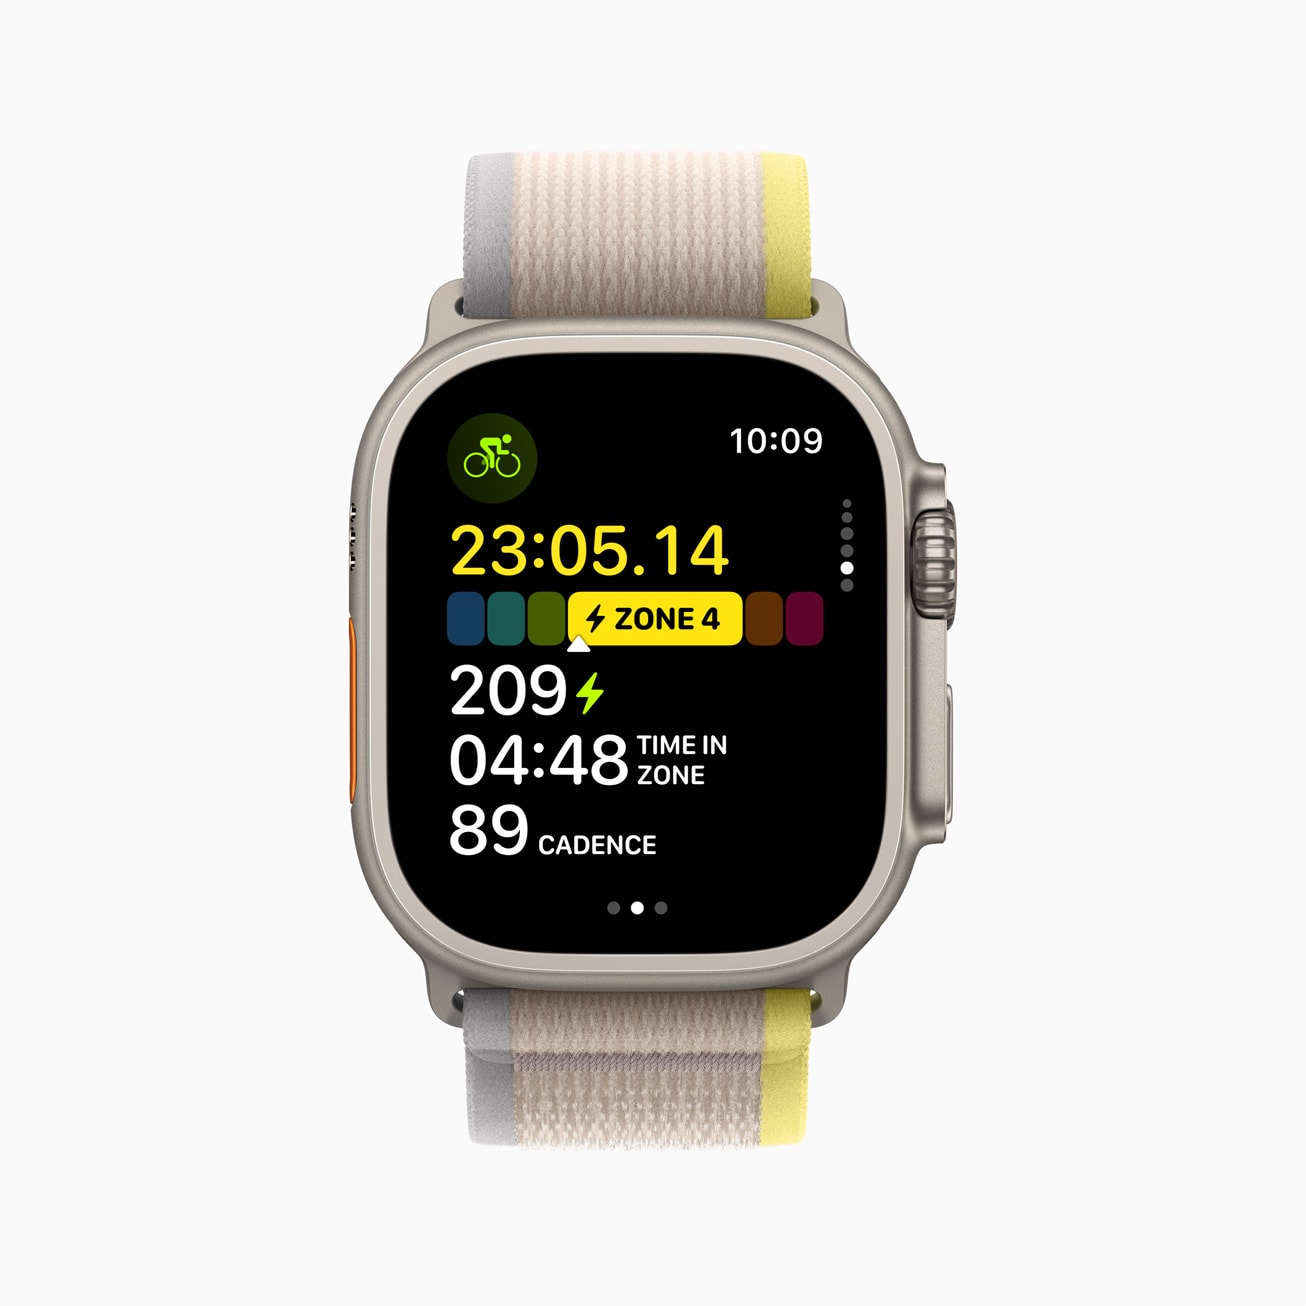 watchOS 10 can show the Functional Threshold Power to calculate personalized Power Zones.